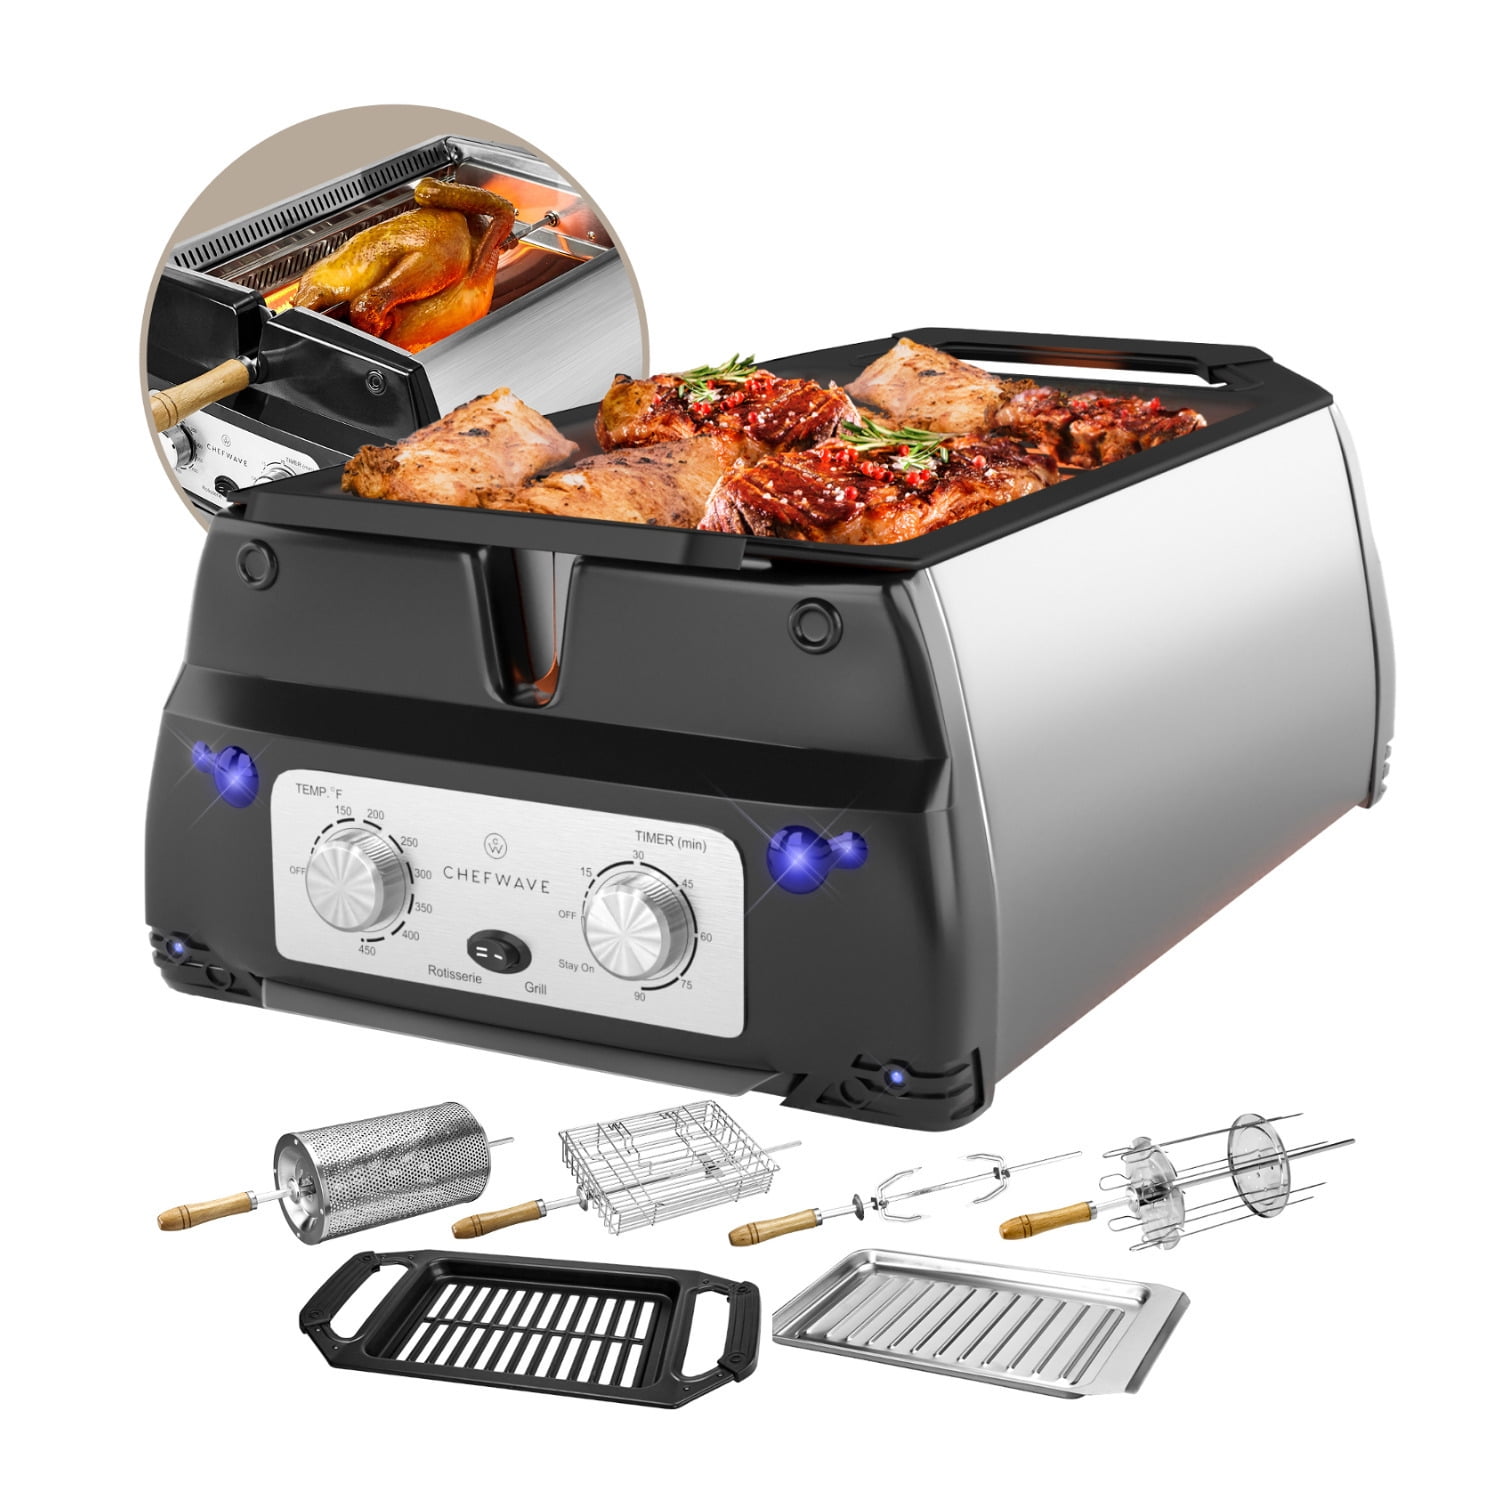 Barbechef: A Smart Cook System that Grills Indoor, Smokeless by